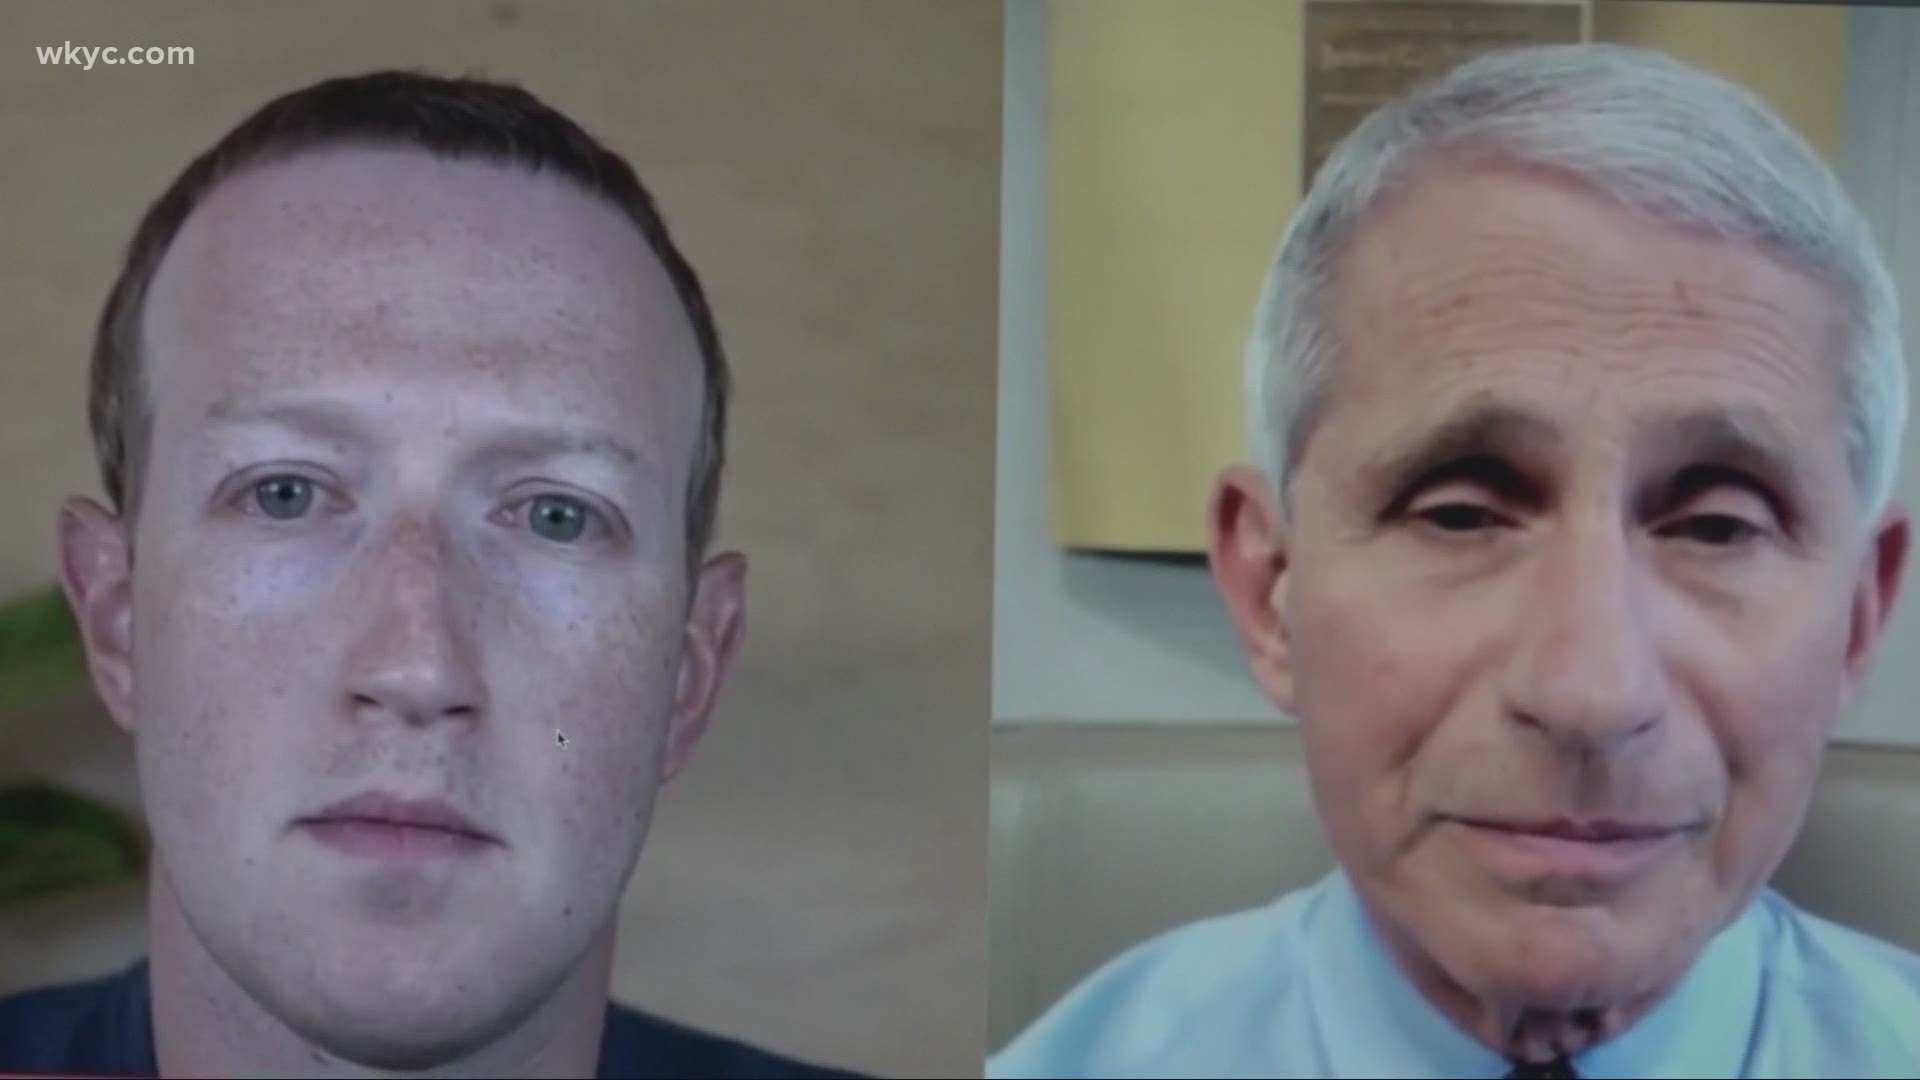 Fauci spoke for nearly an hour with Mark Zuckerberg. Will Ujek reports.